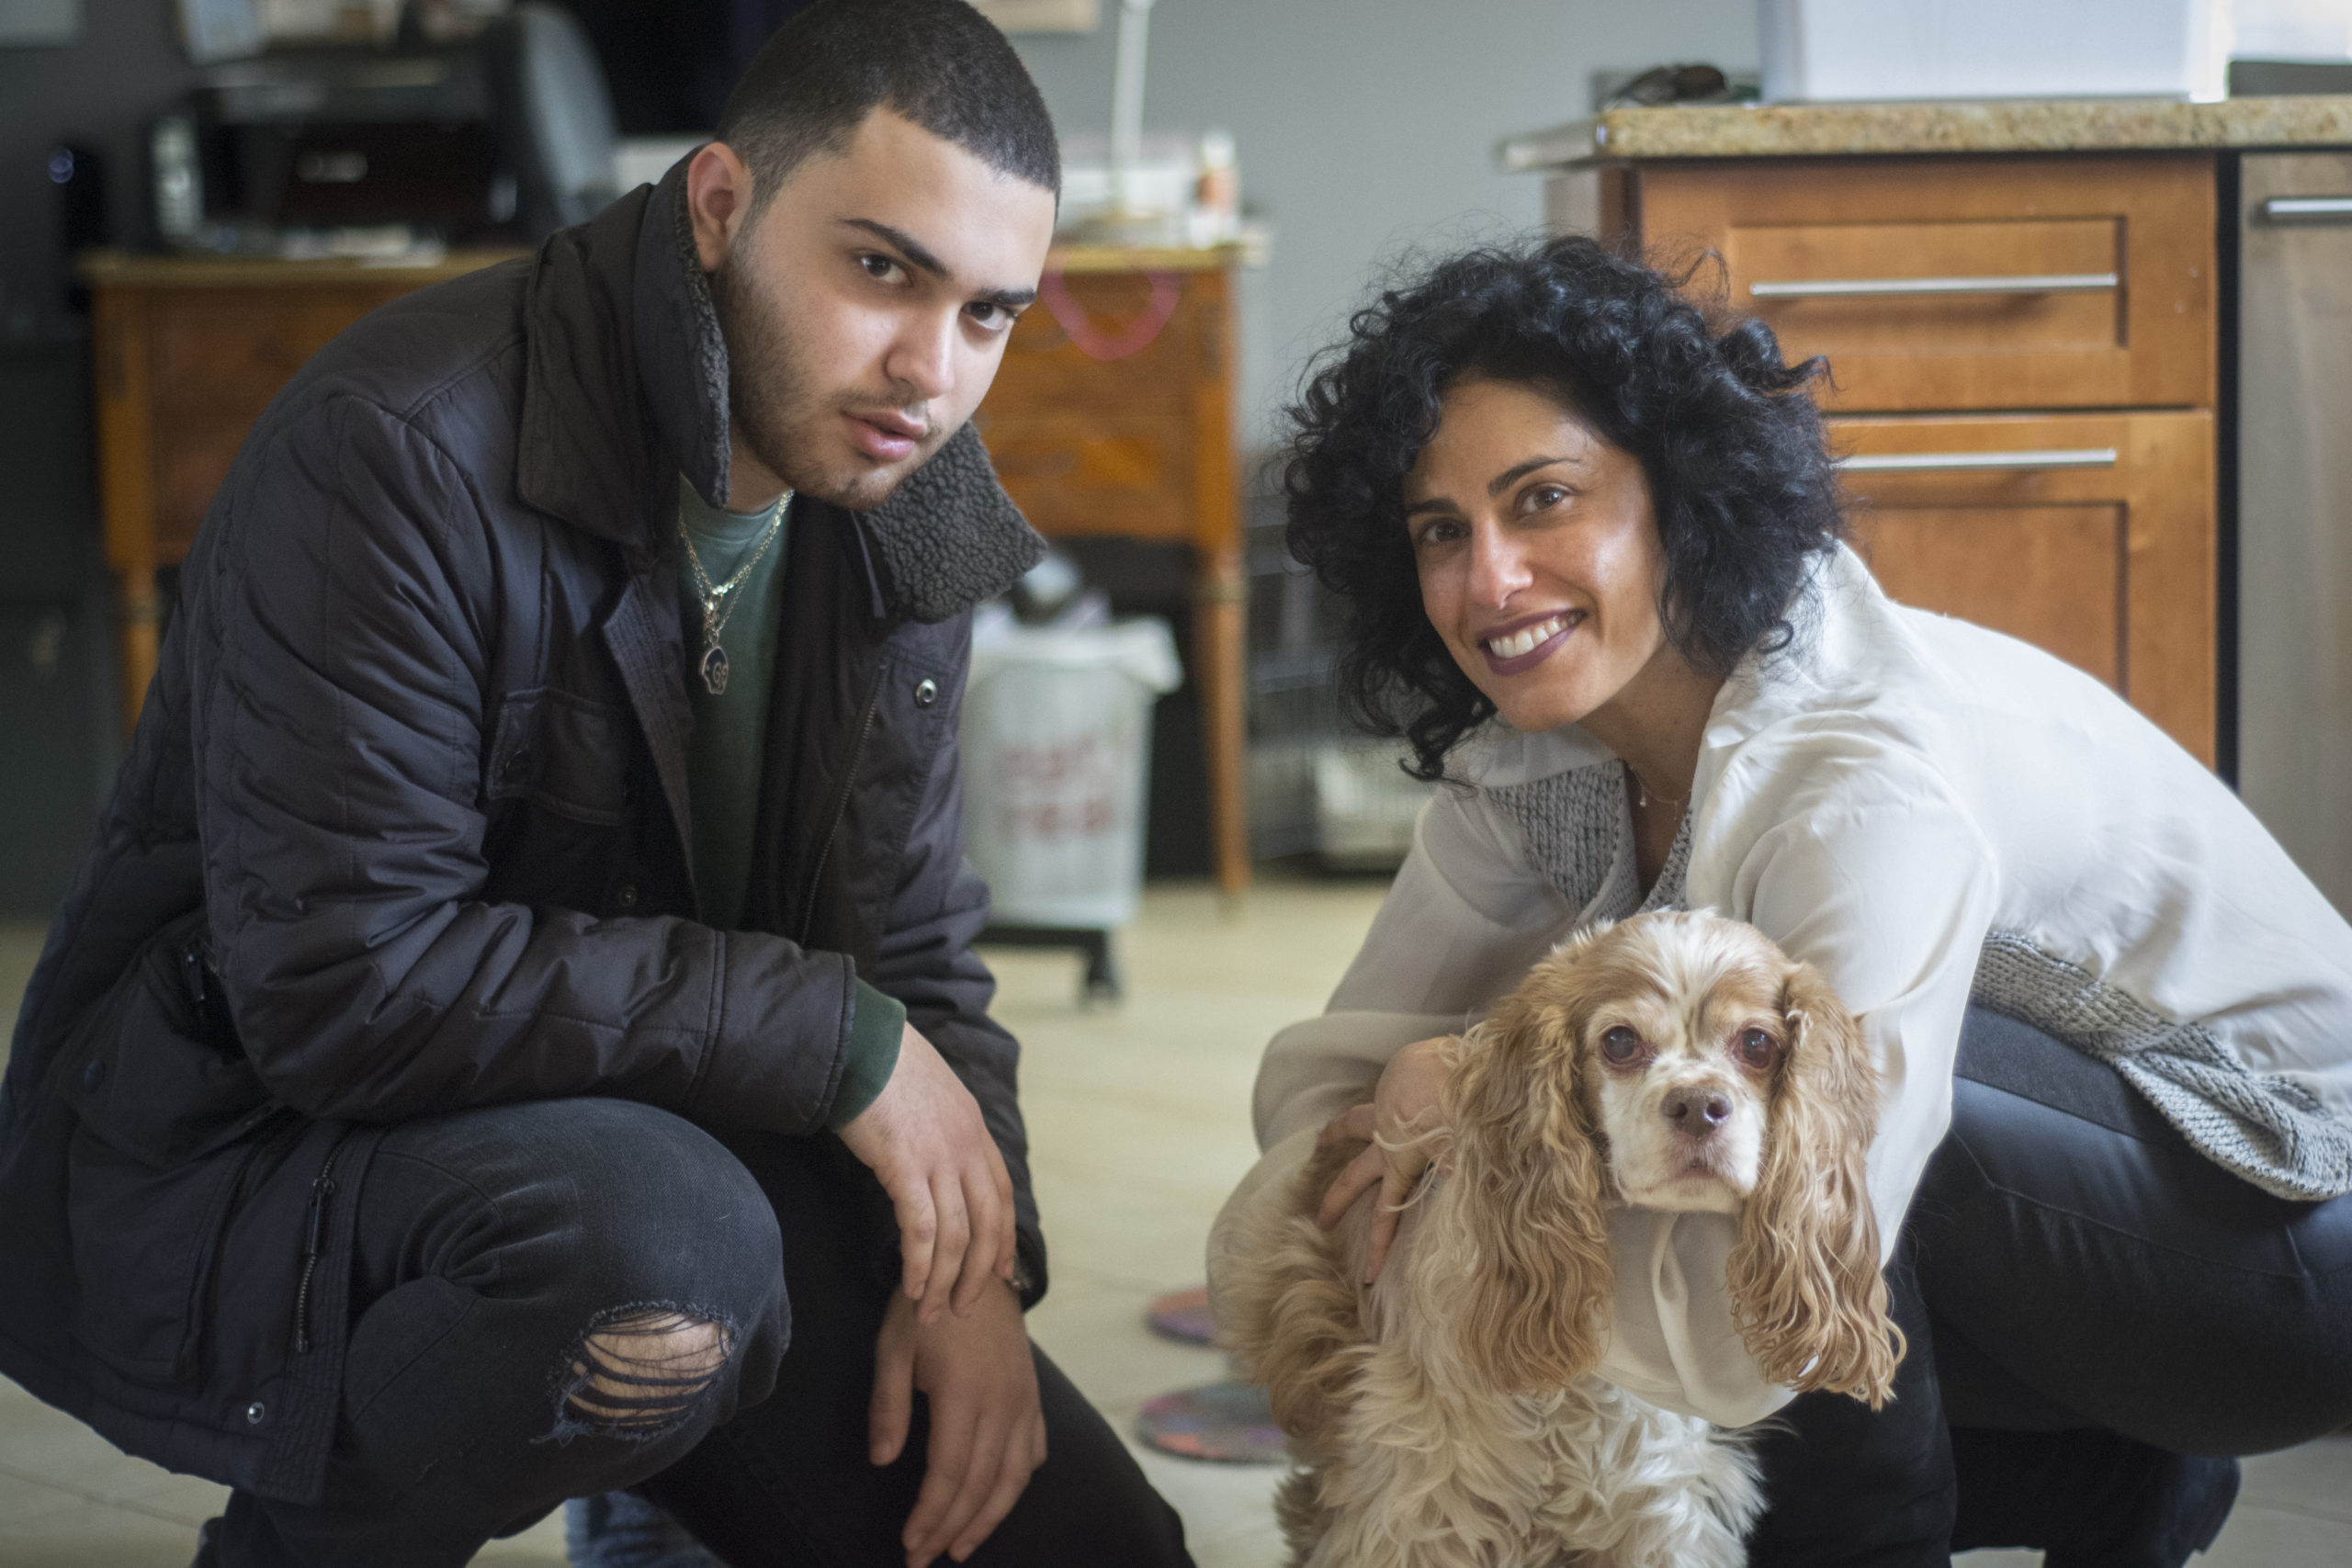 Flynn, a 13-year-old four legged resident of Great Neck Estates, poses with his owner Dahlia Abraham Klein and her son, Jonah Hersh. (Photo by Janelle Clausen)